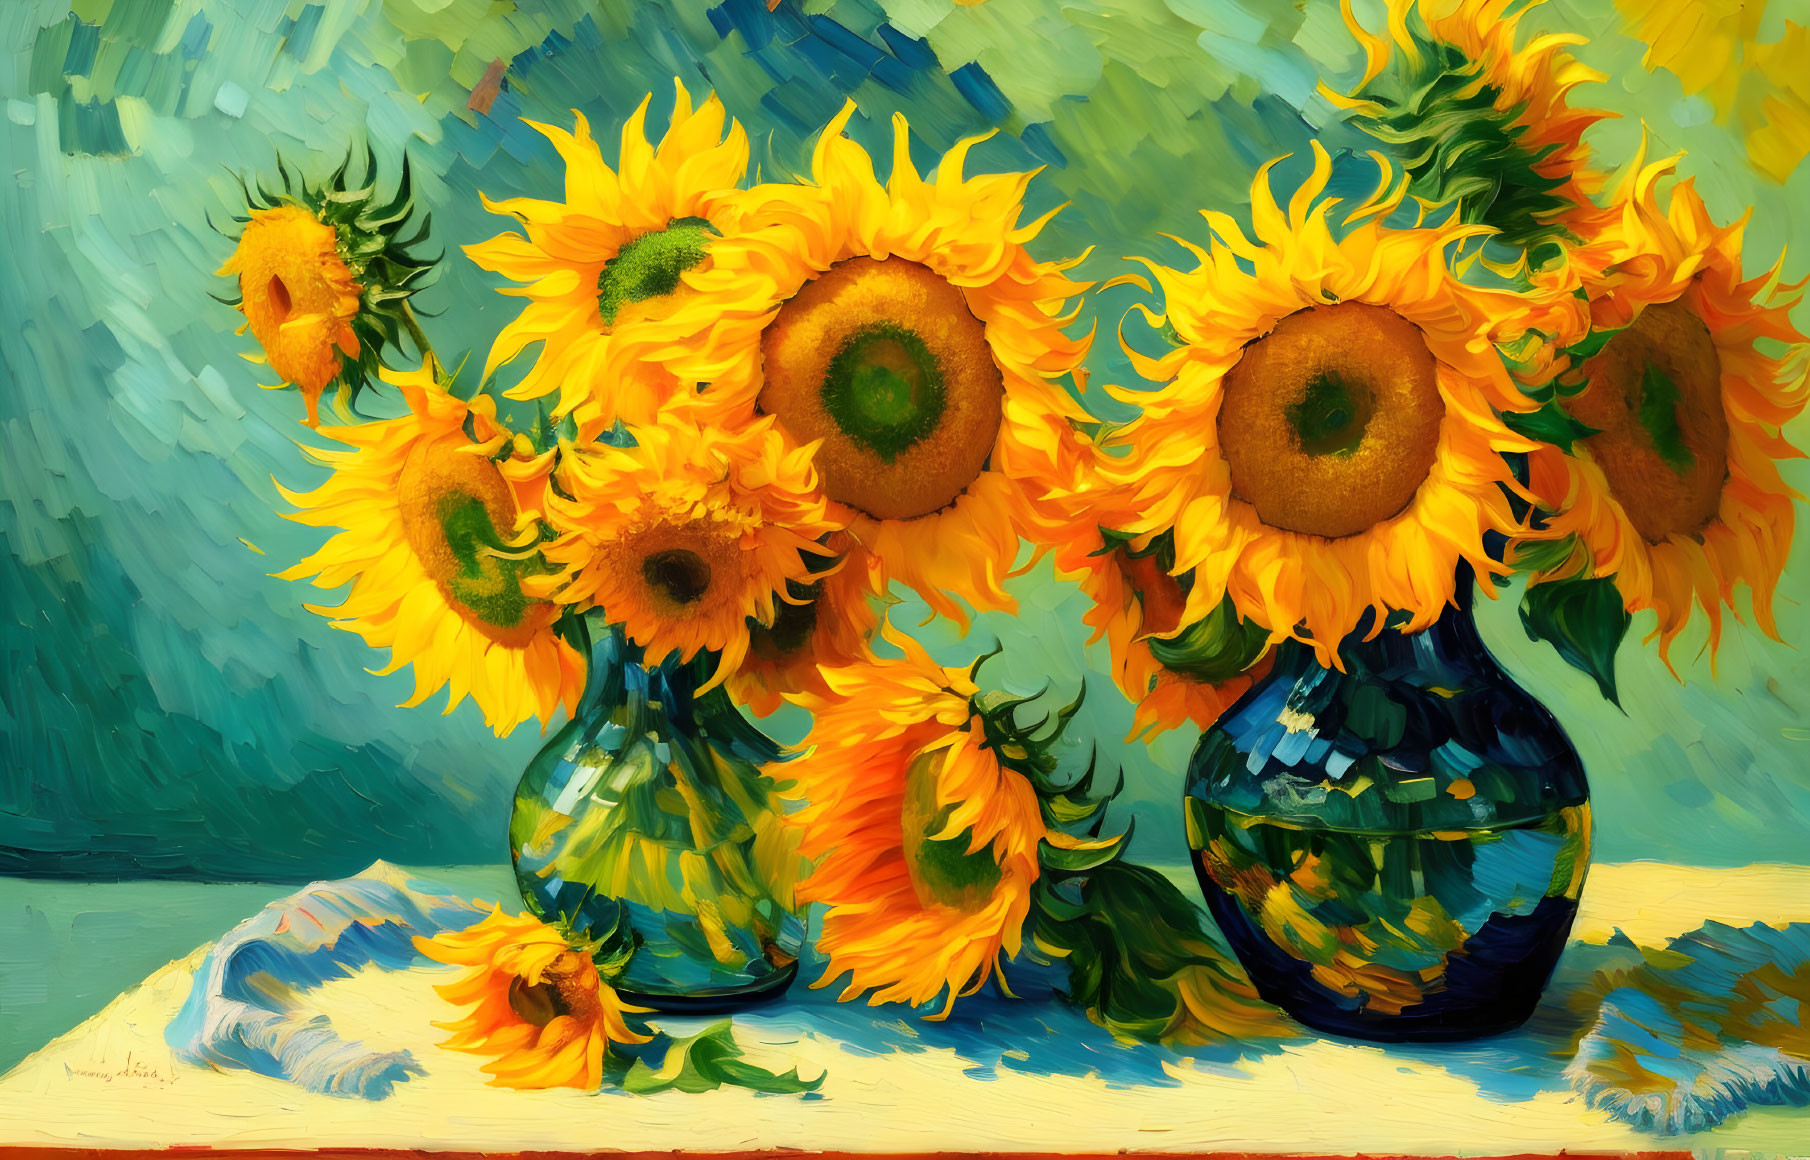 Sunflower painting with blue glass vases on table